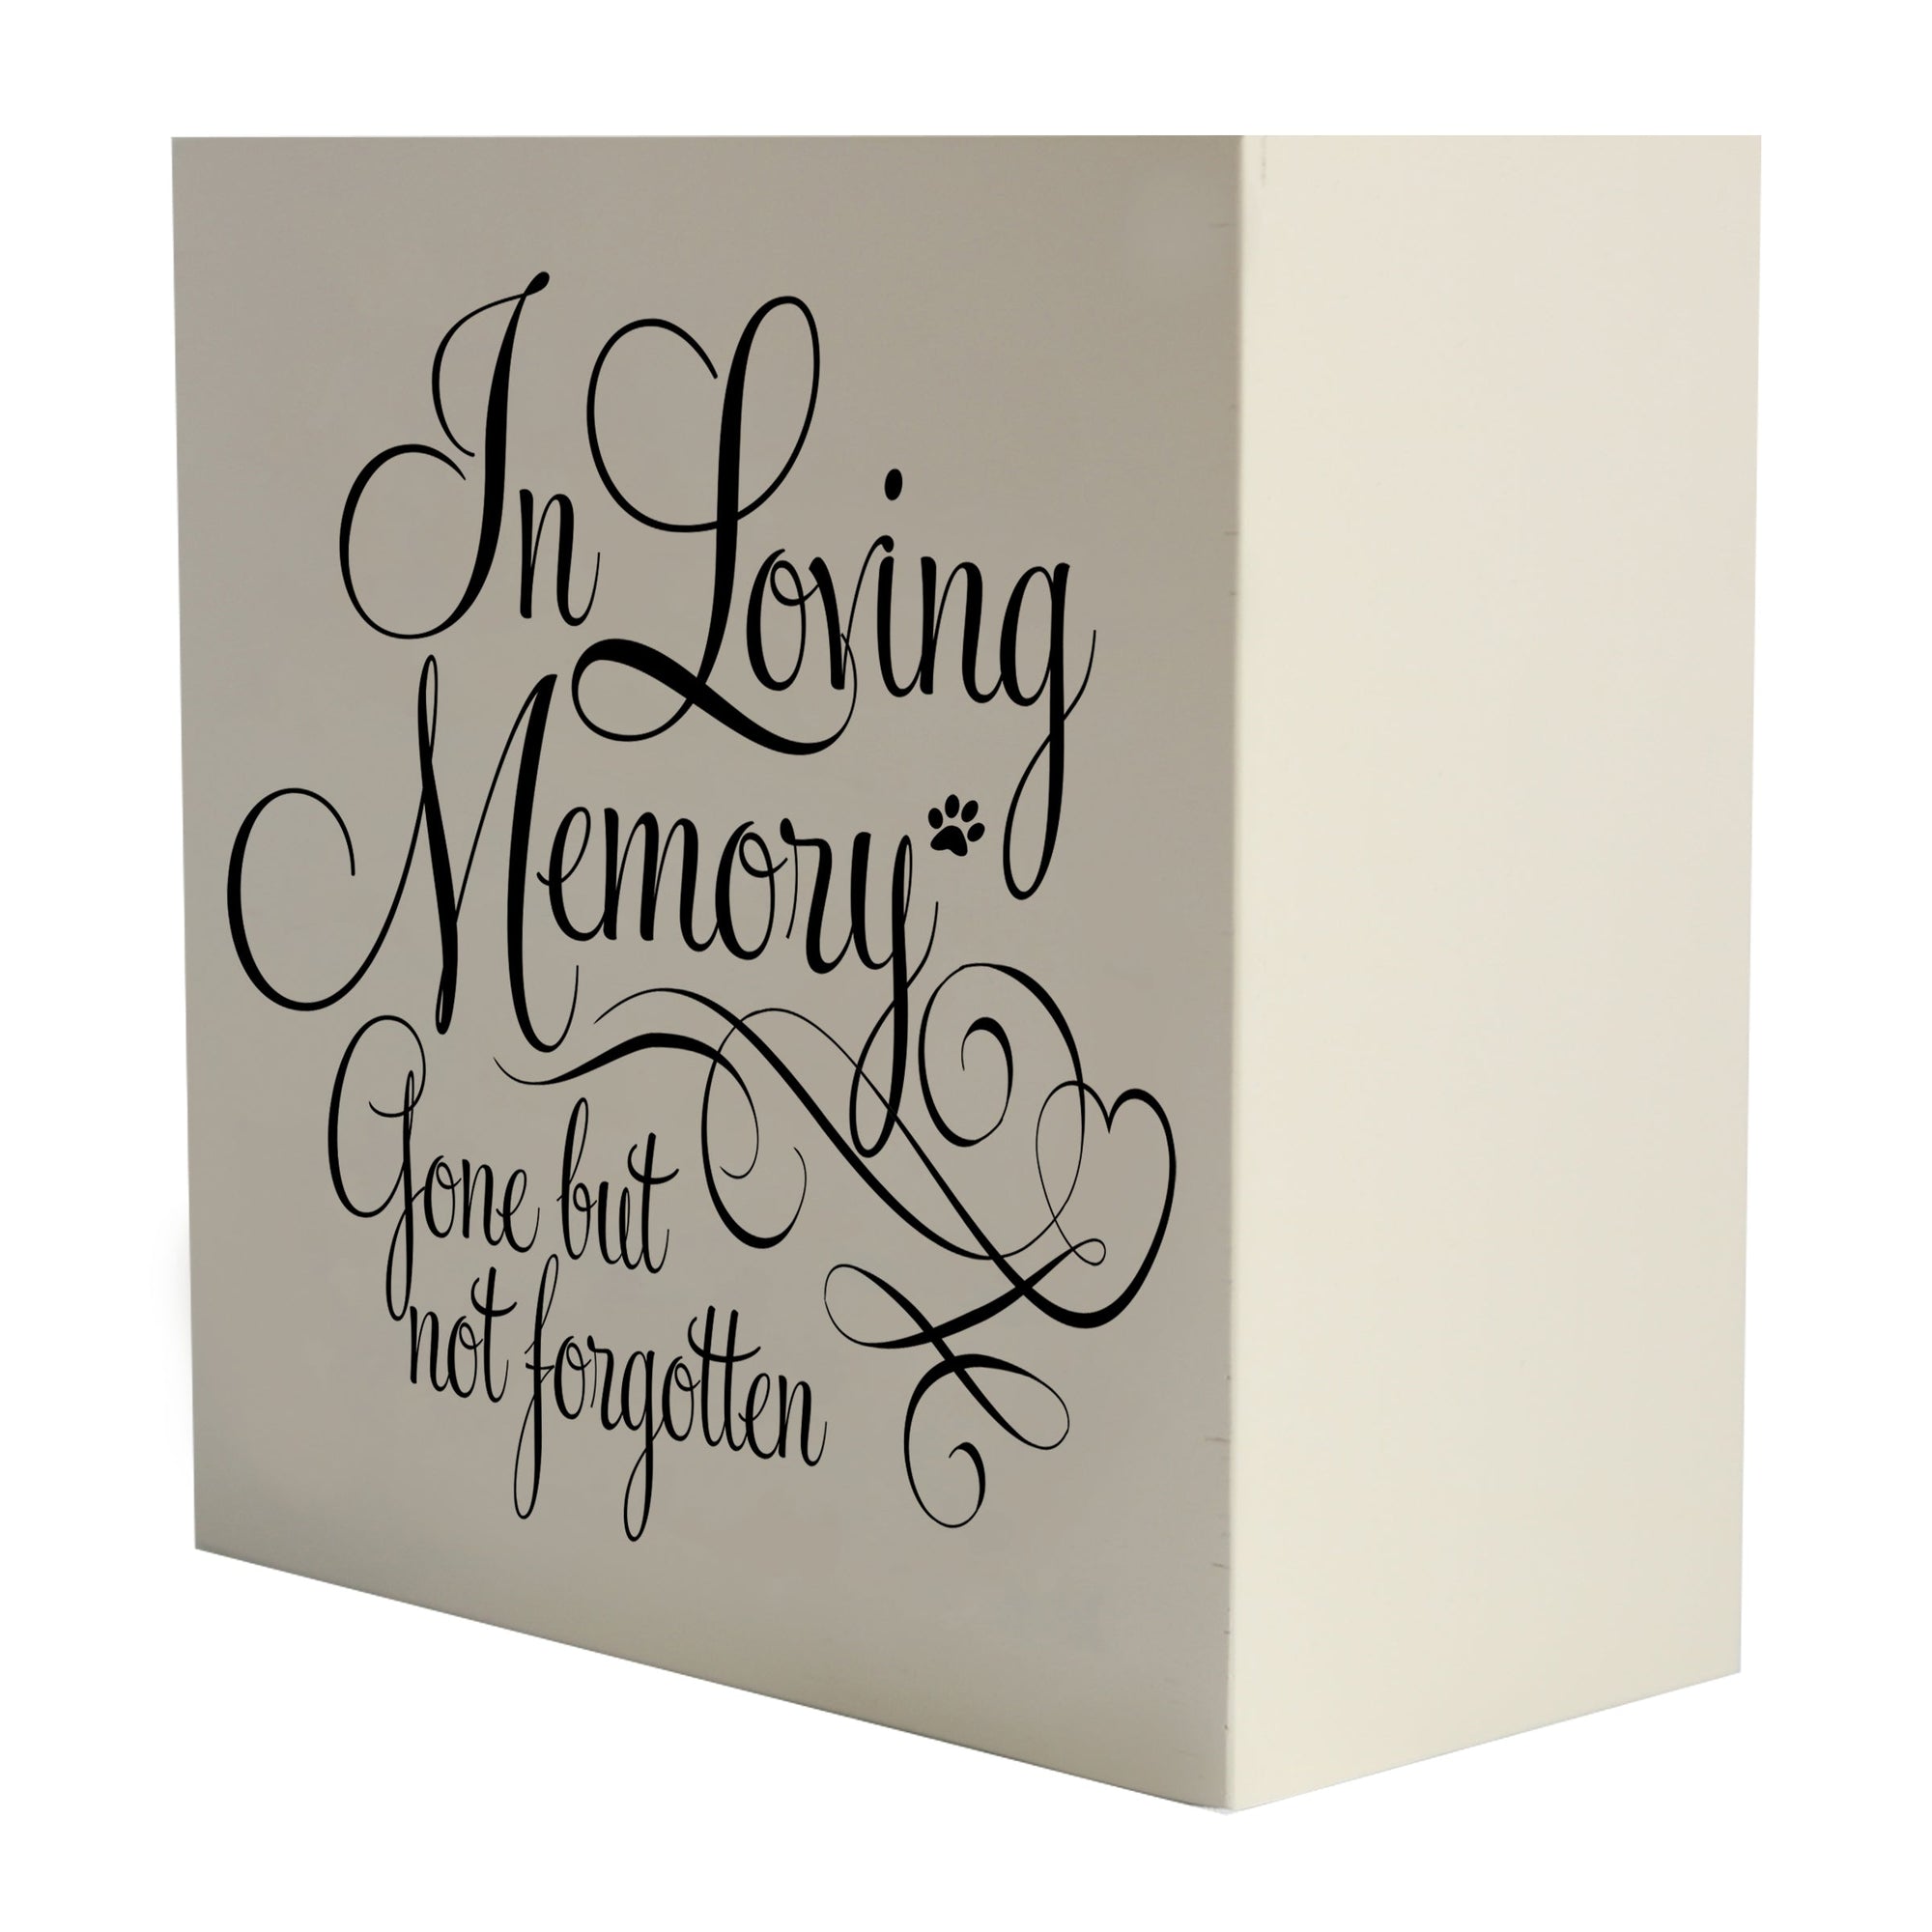 Pet Memorial Shadow Box Cremation Urn for Dog or Cat - In Loving Memory